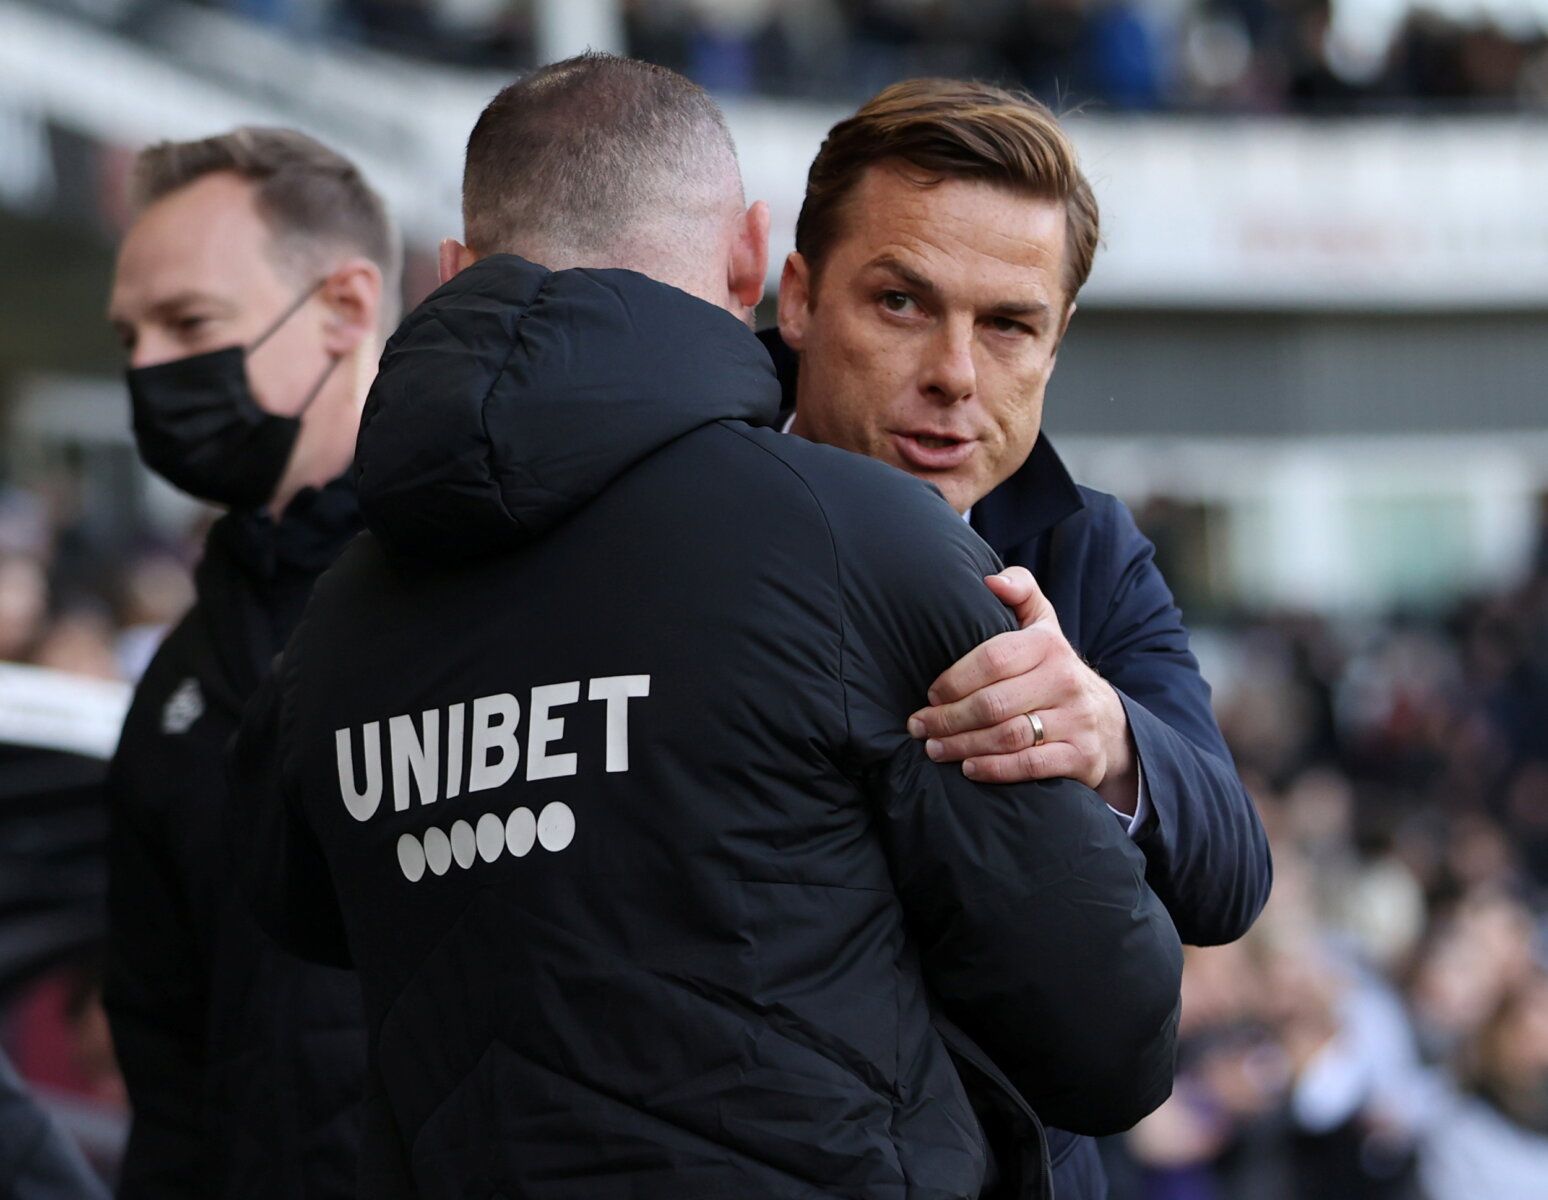 Soccer Football - Championship - Derby County v AFC Bournemouth - Pride Park, Derby, Britain - November 21, 2021 Derby County manager Wayne Rooney and Bournemouth manager Scott Parker before the match Molly Darlington/Action Images